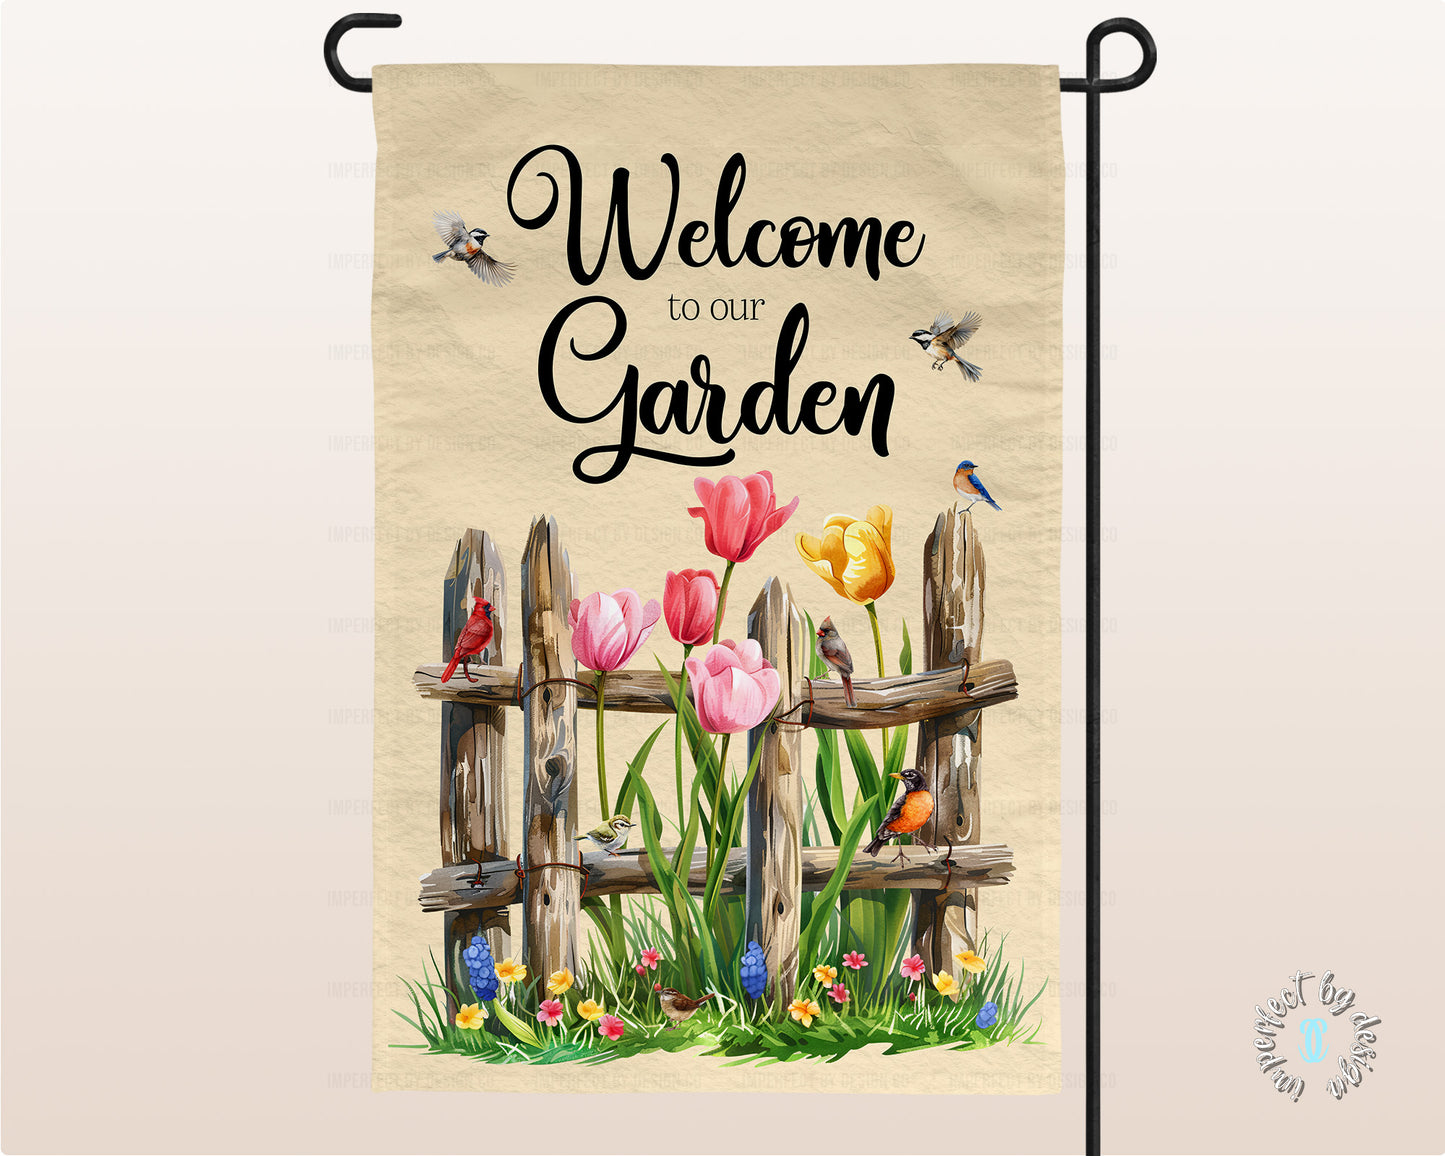 Garden Flag Featuring A Rustic Fence Surrounded By Flowers And Birds, Welcome To Our Garden